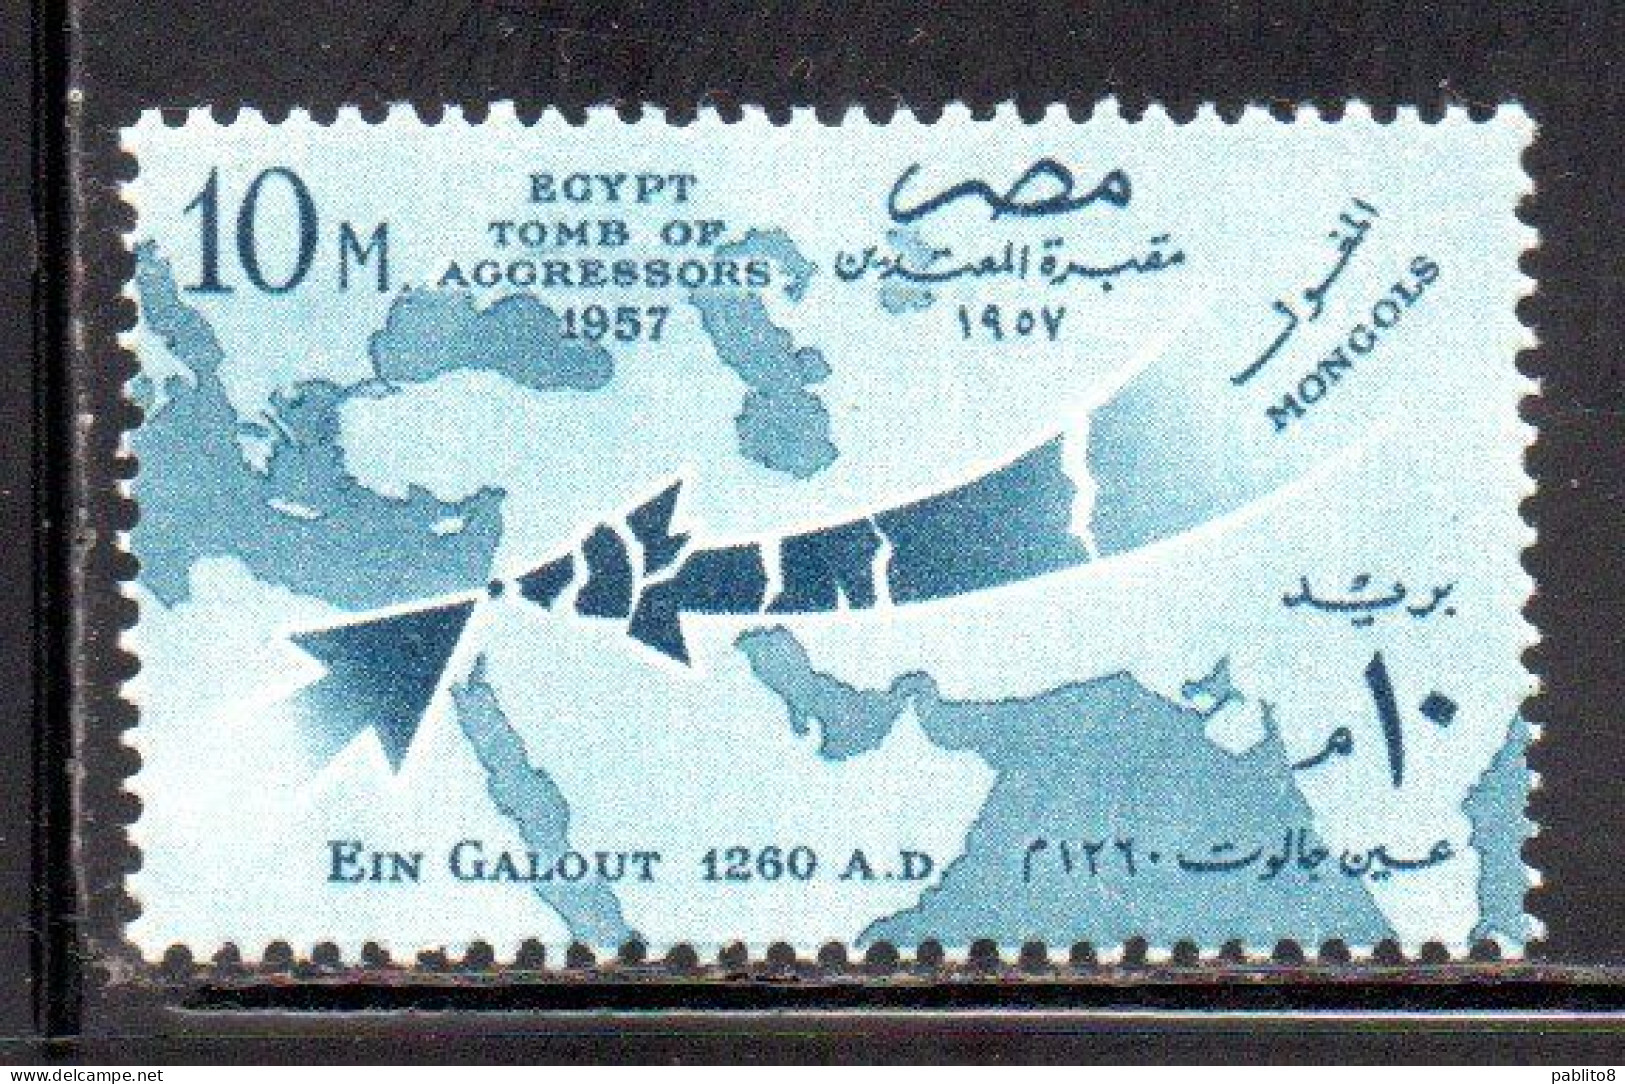 UAR EGYPT EGITTO 1957 TOMB OF AGGRESSORS 1957 MAP OF MIDDLE EAST EIN GALOUT 1260 10m MH - Nuovi